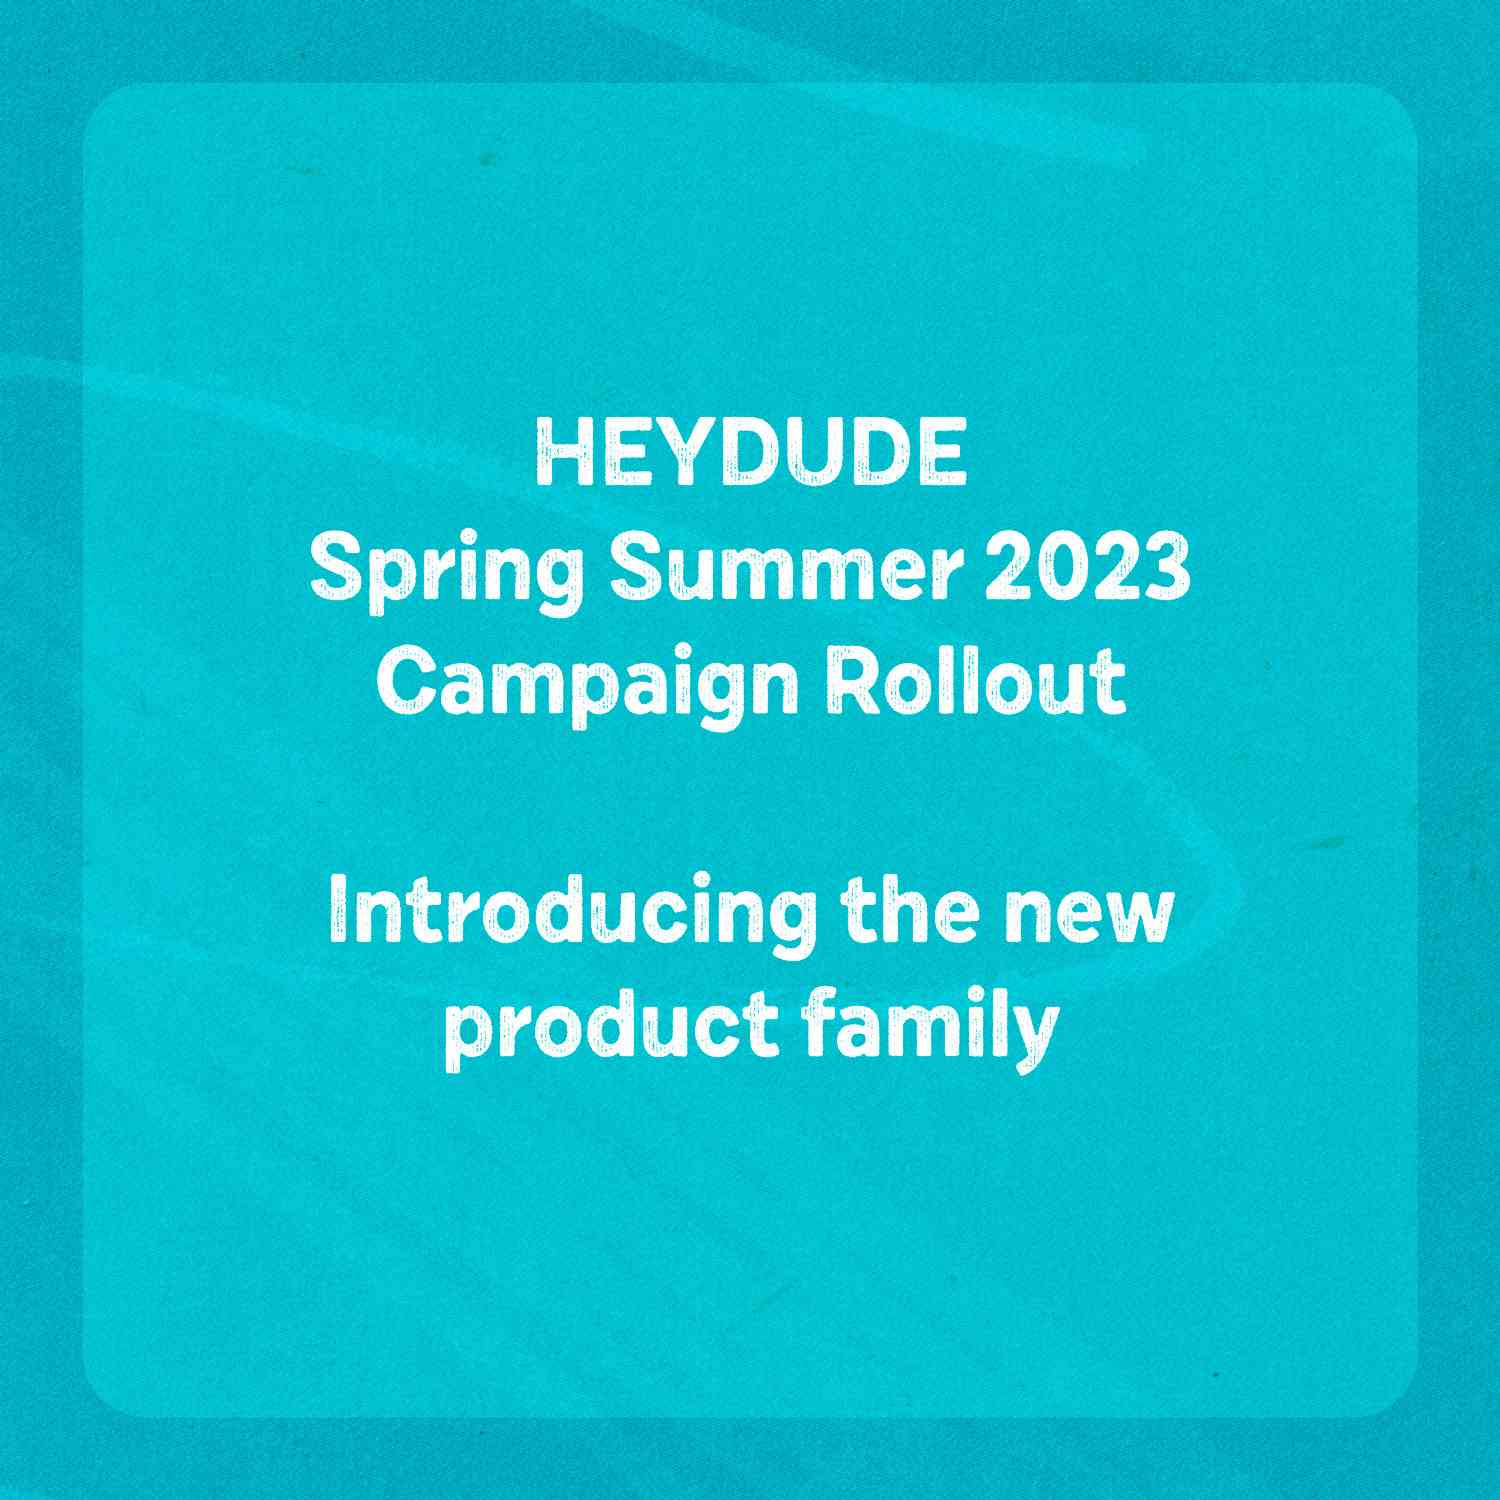 Heydude Spring Summer 2023 Campaign Rollout. Introducing the new product family